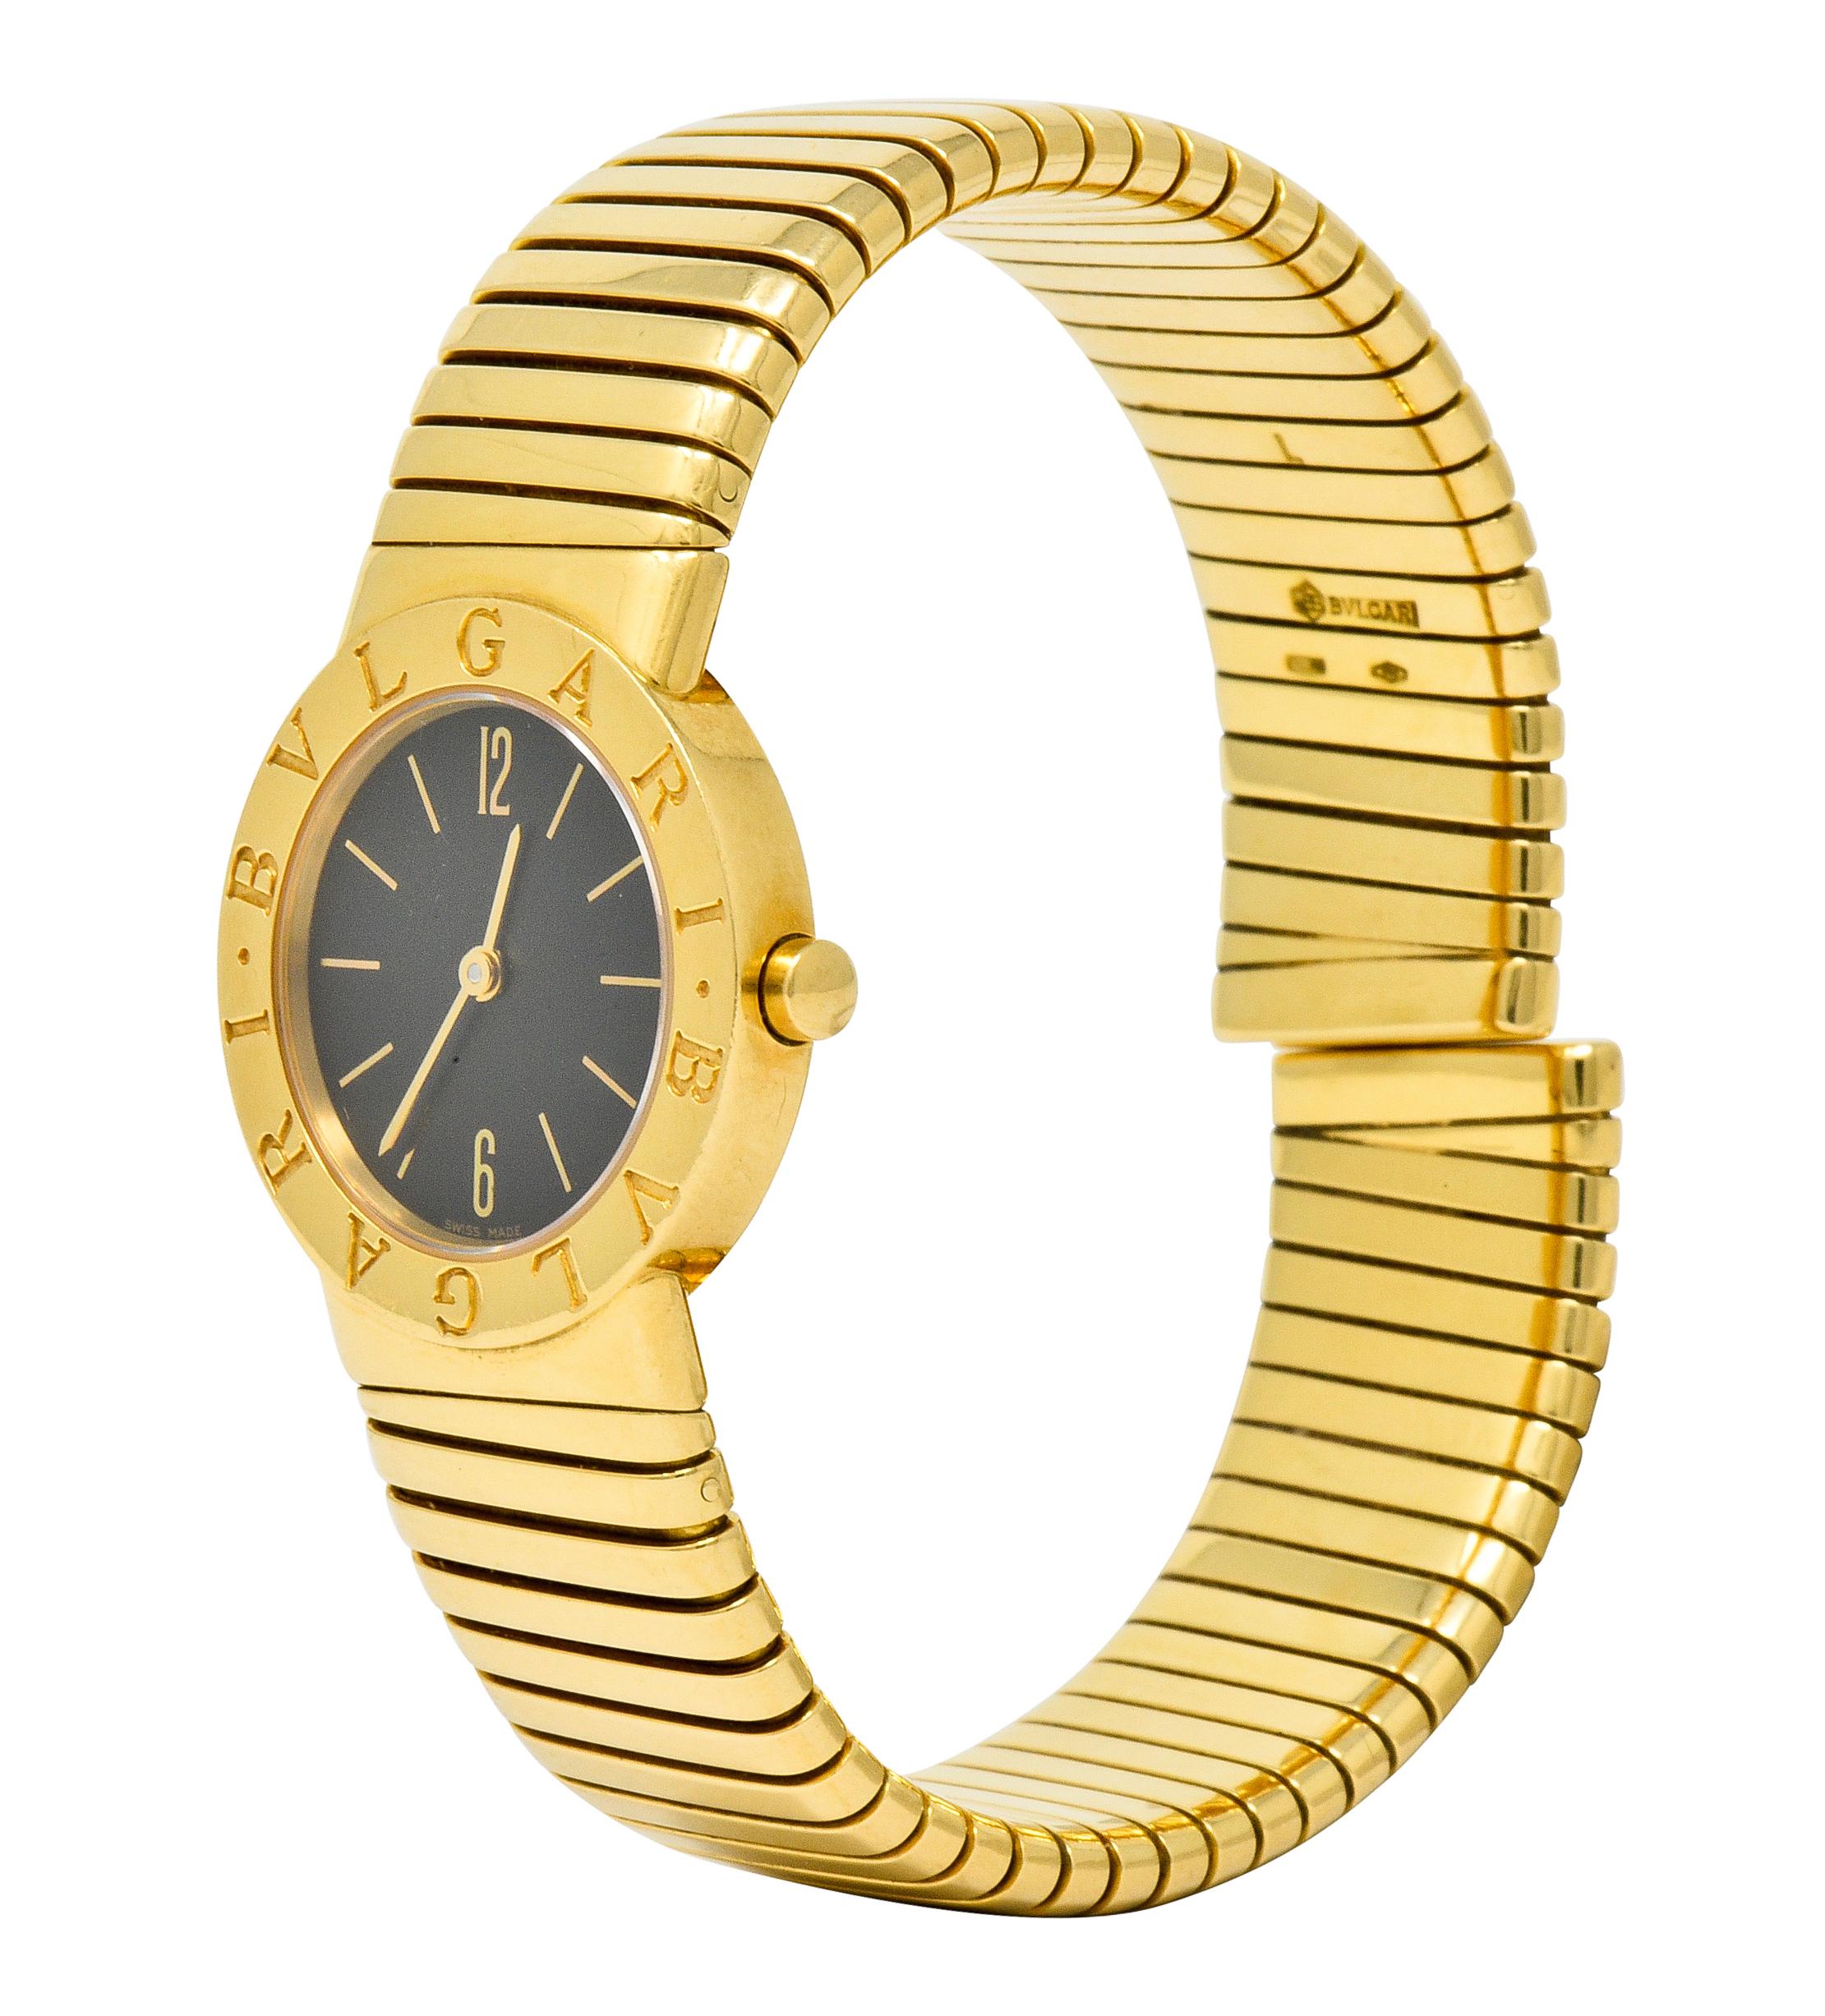 Flexible cuff style bracelet comprised of deeply ridged tubogas technology

Centering a sapphire crystal cover over a black watch face accented by gold hands and numerical markers

With a polished gold surround deeply engraved BVLGARI, twice